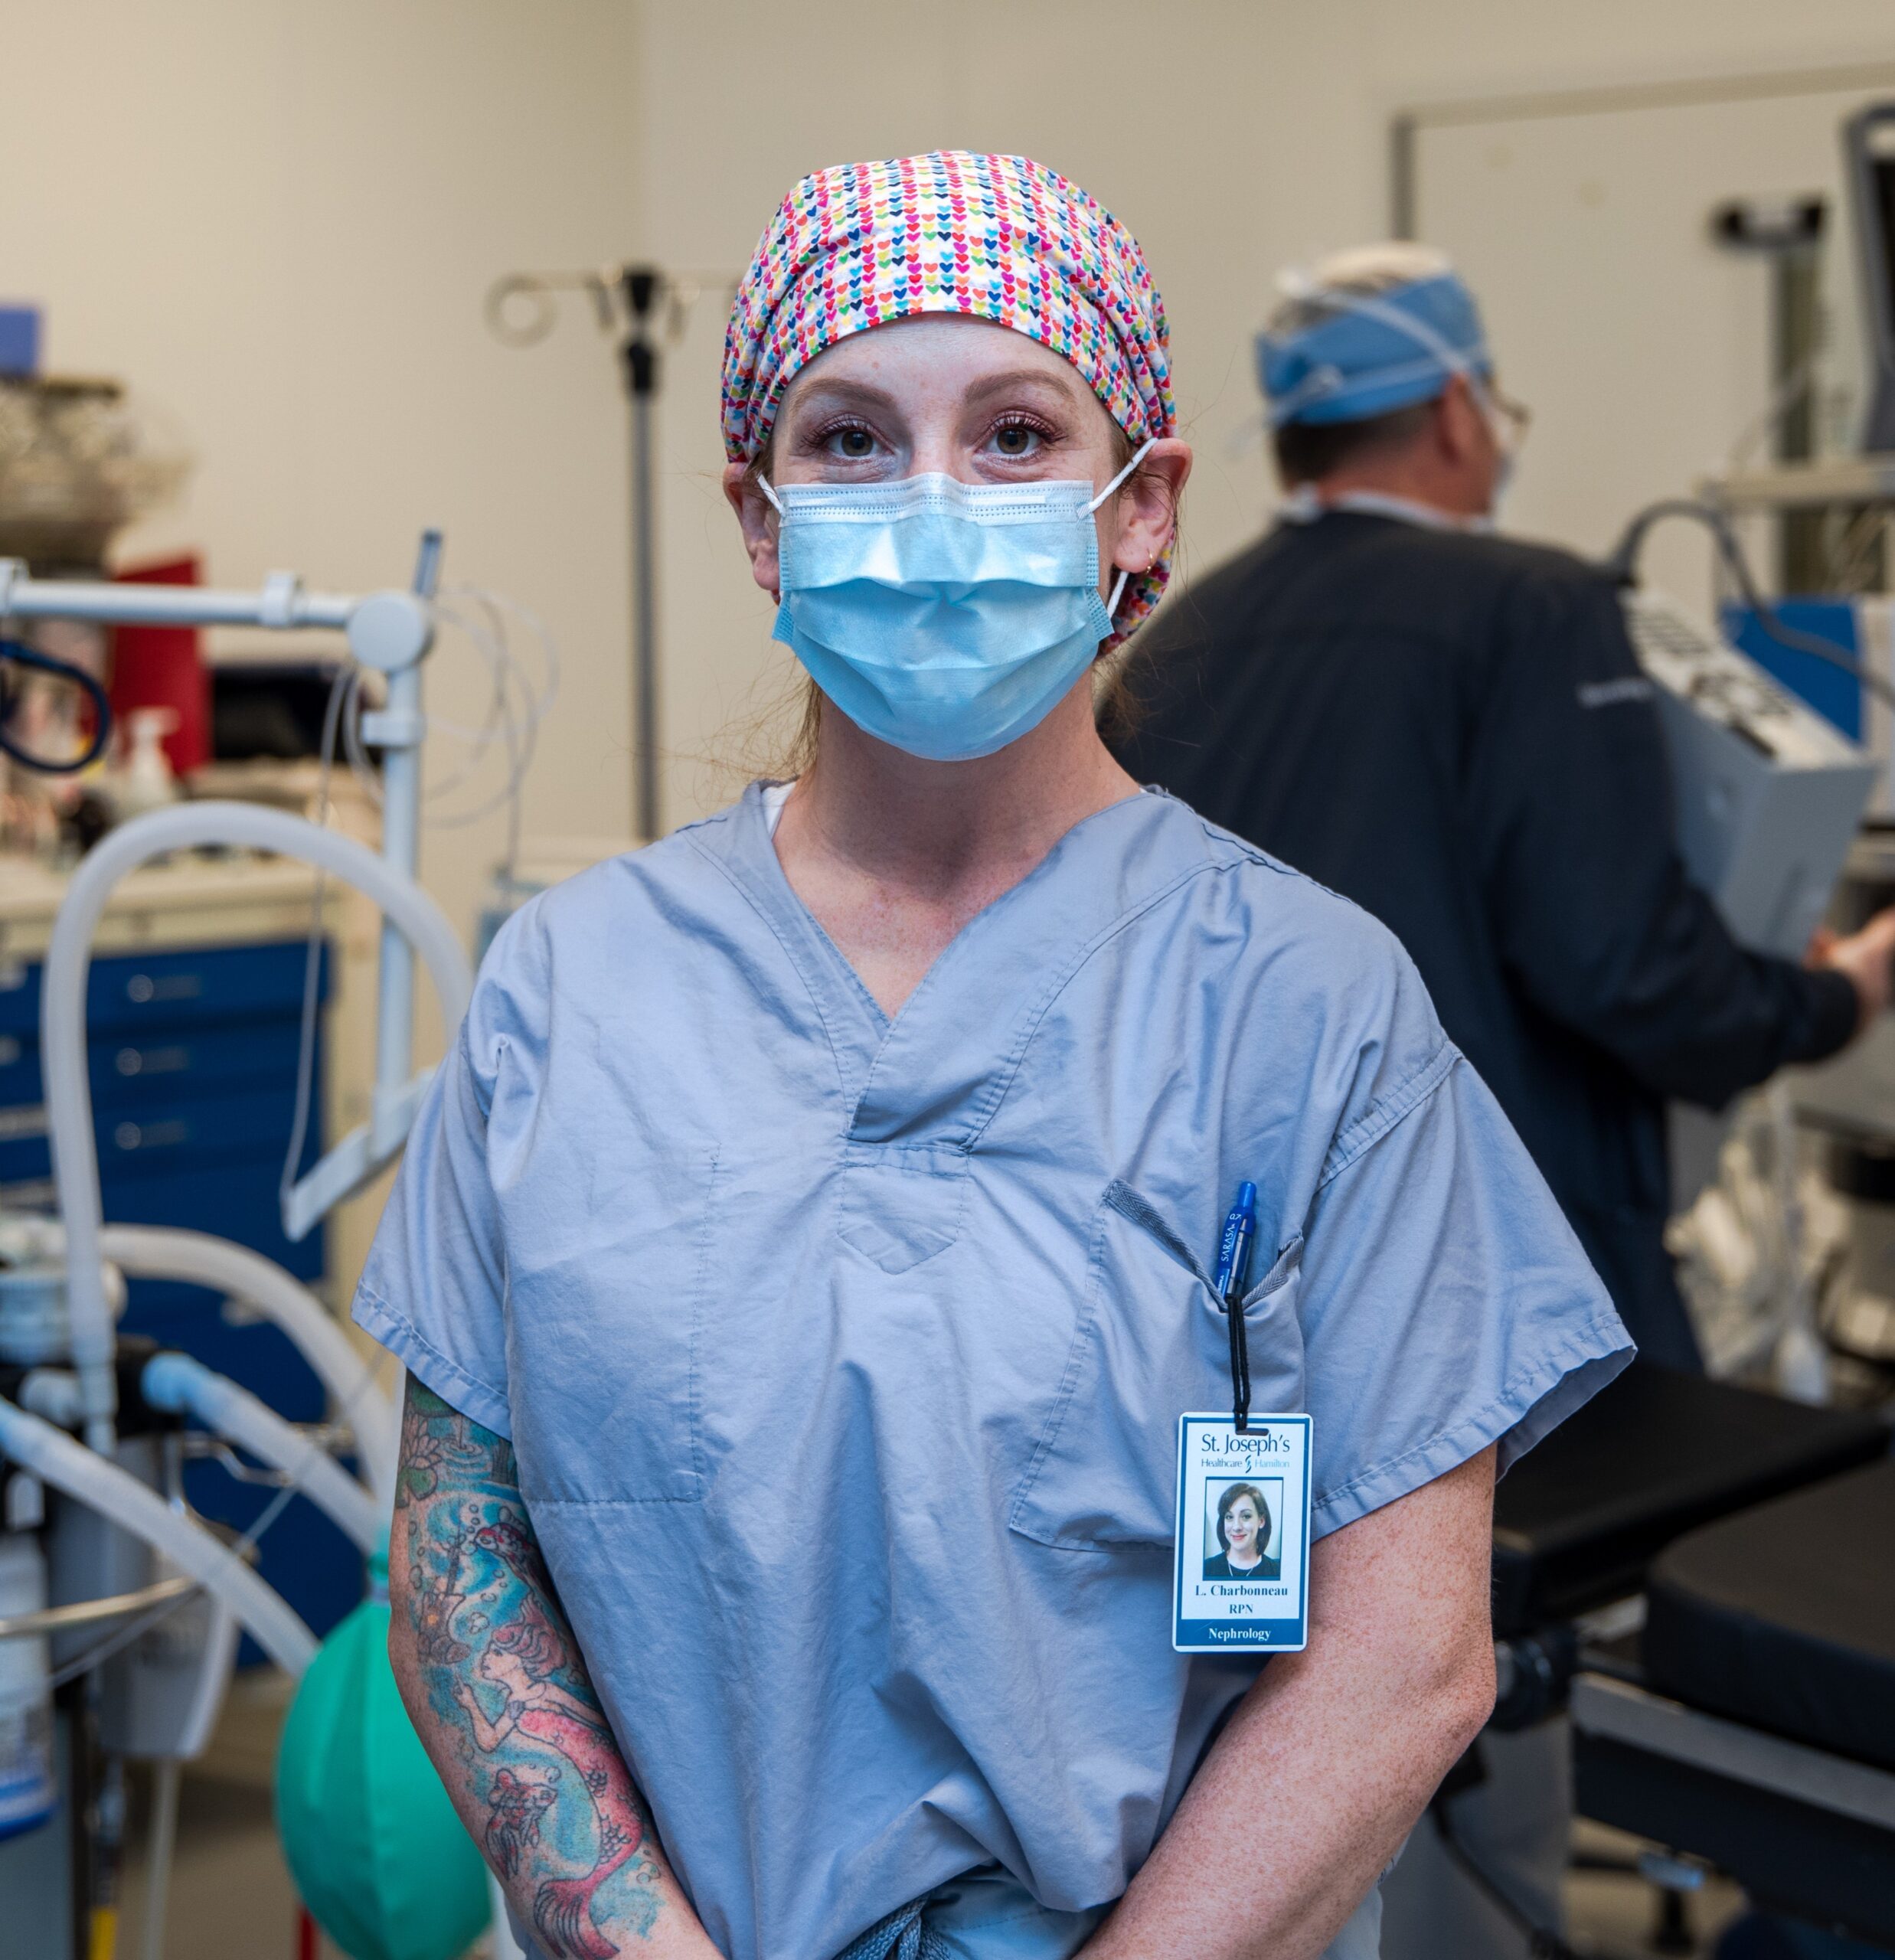 Registered Practical Nurse Charbonneau stands in the operating room at St. Joseph’s Healthcare Hamilton surrounded by operating room equipment. Charbonneau is wearing a surgical cap, mask and scrubs, and is looking directly at the camera with hands clasped gently in front of her.